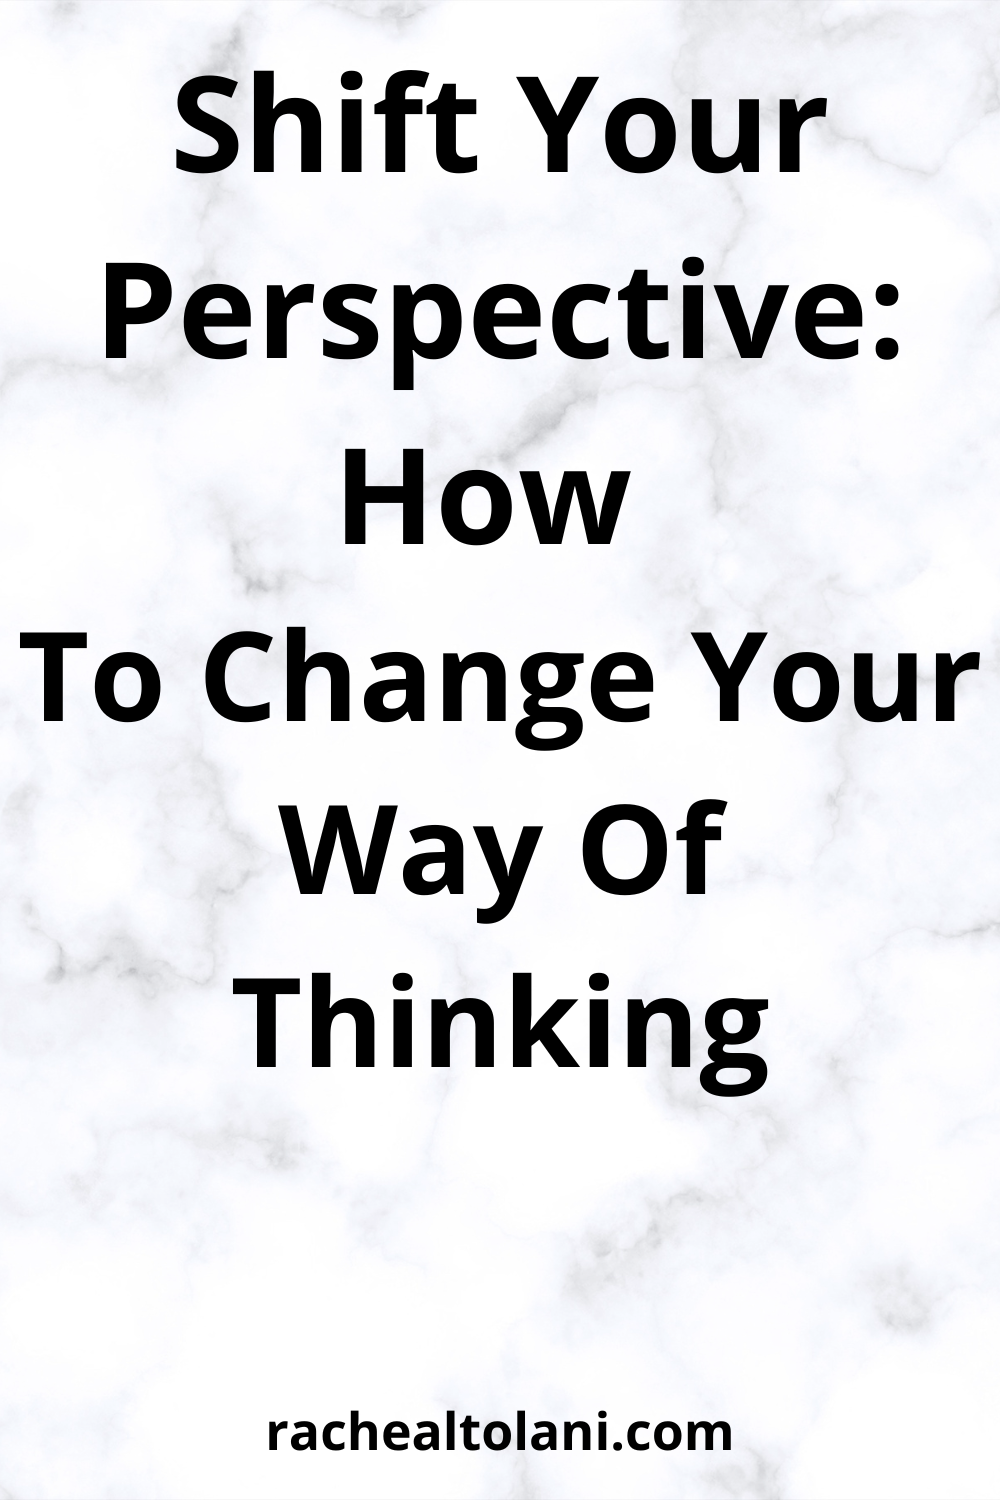 How To Change Your Way Of Thinking